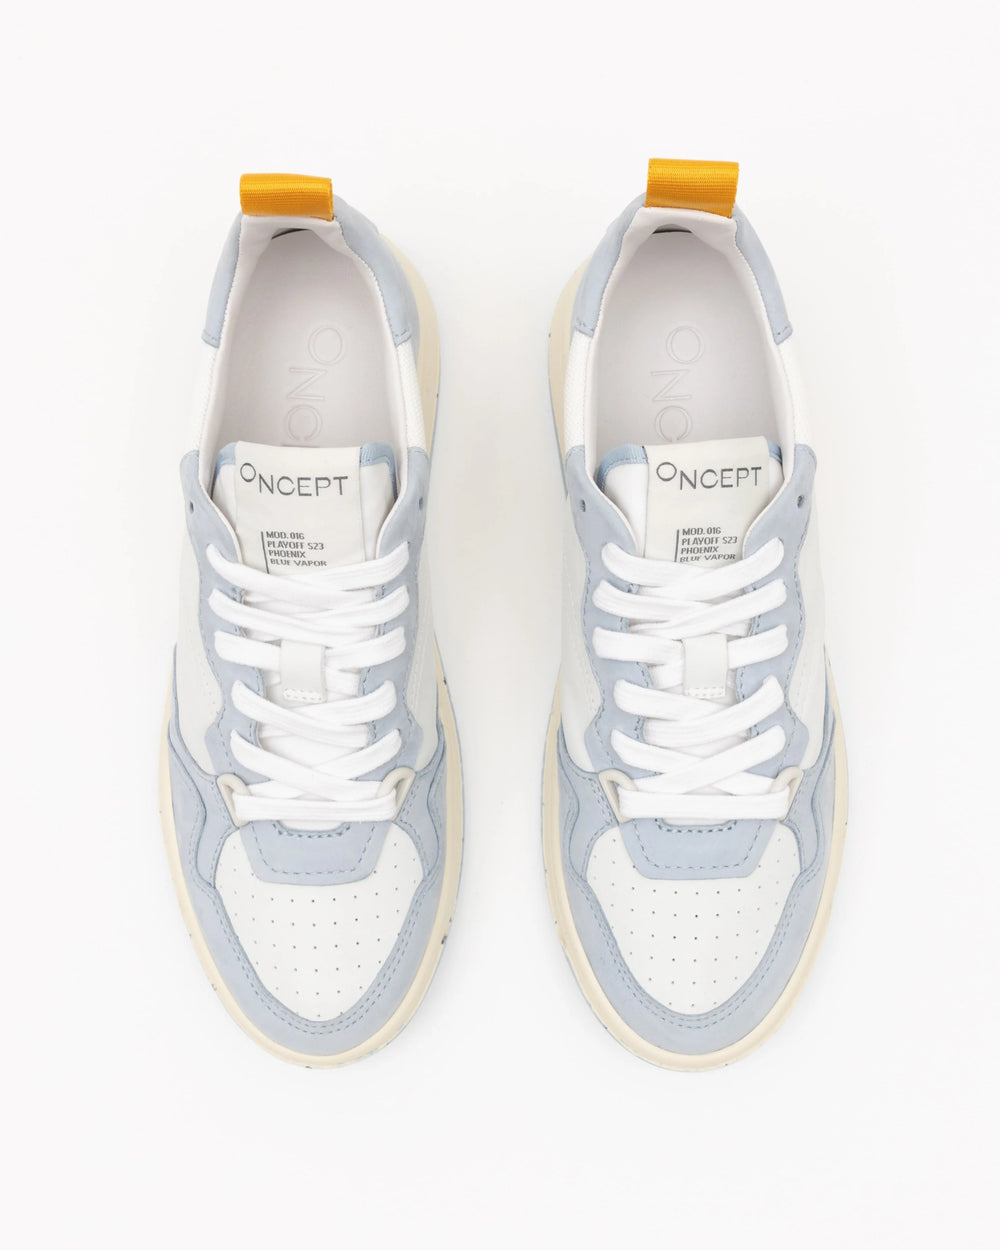 Oncept - Phoenix in Blue Vapor features a luxe colorway, organic cotton laces, butter leather and re-speckled soles. A modern mix on old school '90's style. 